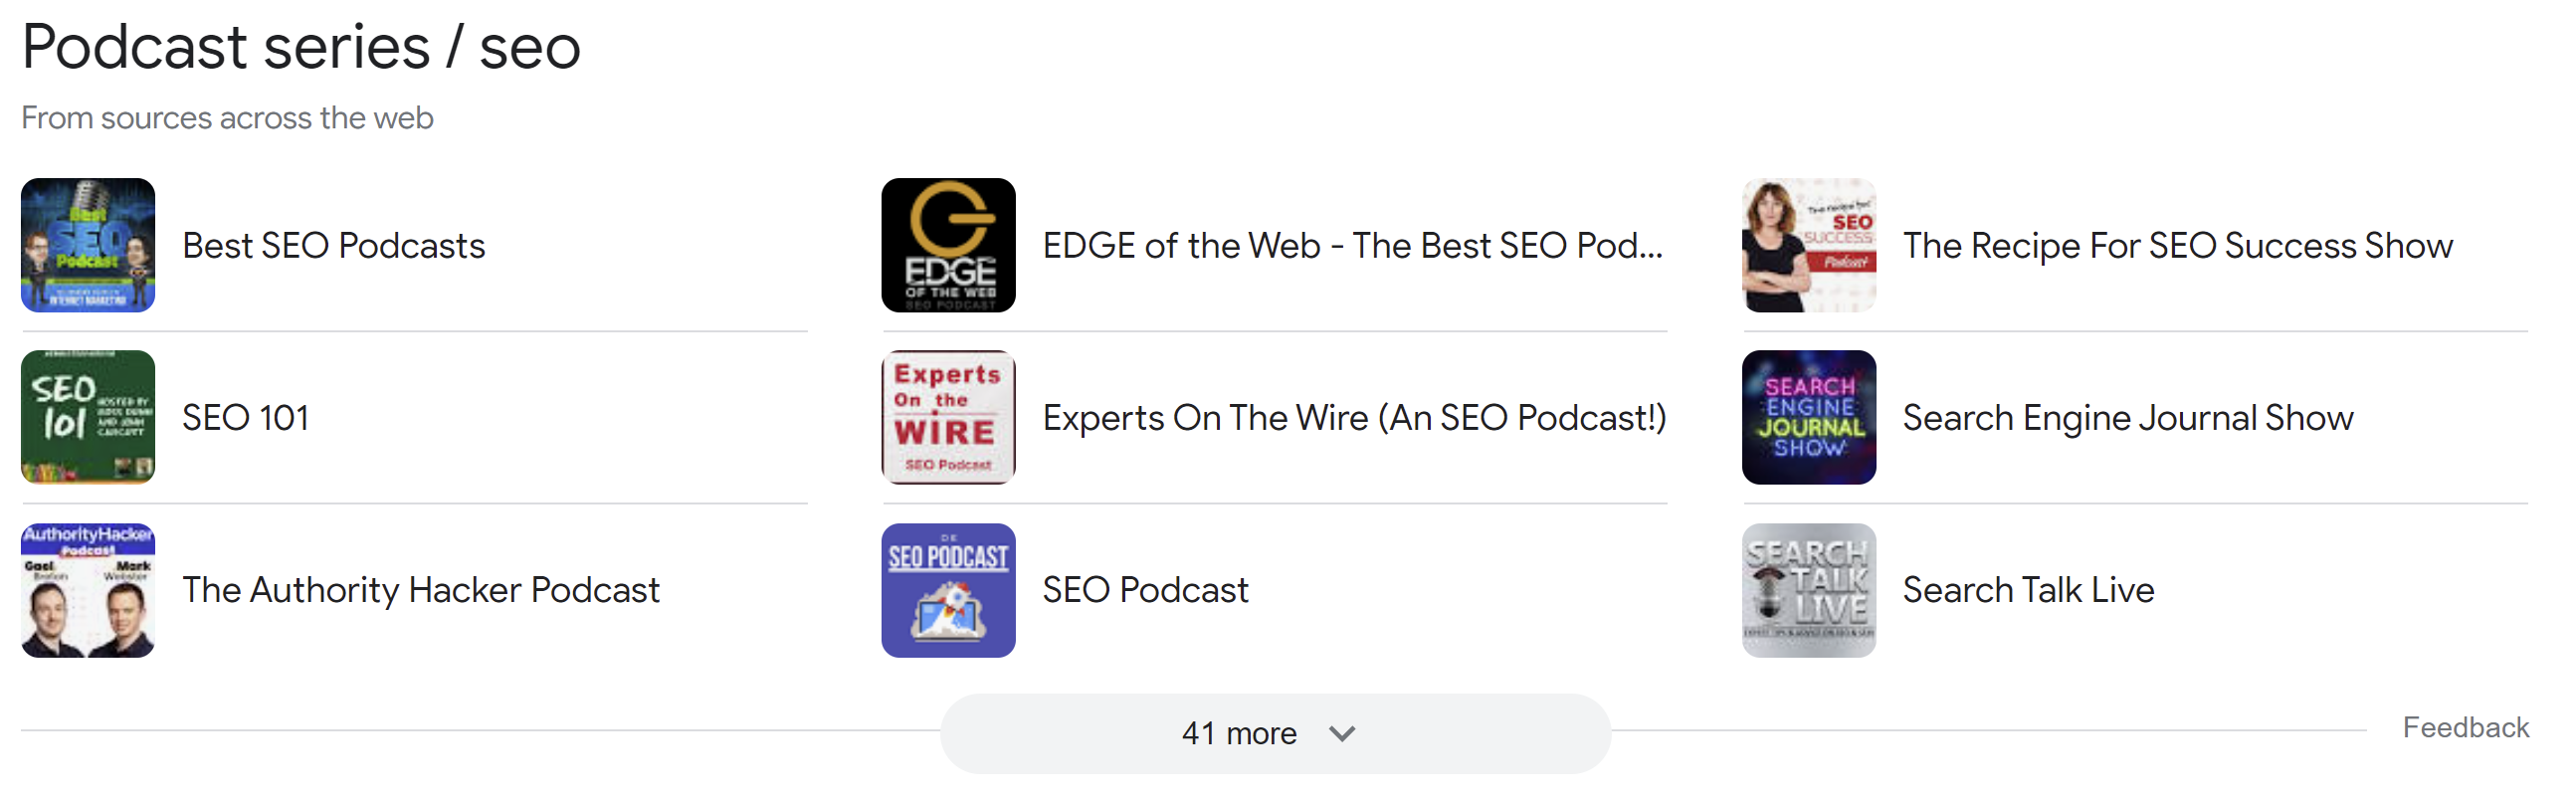 Google: 'Best of'-Podcast-Karussell